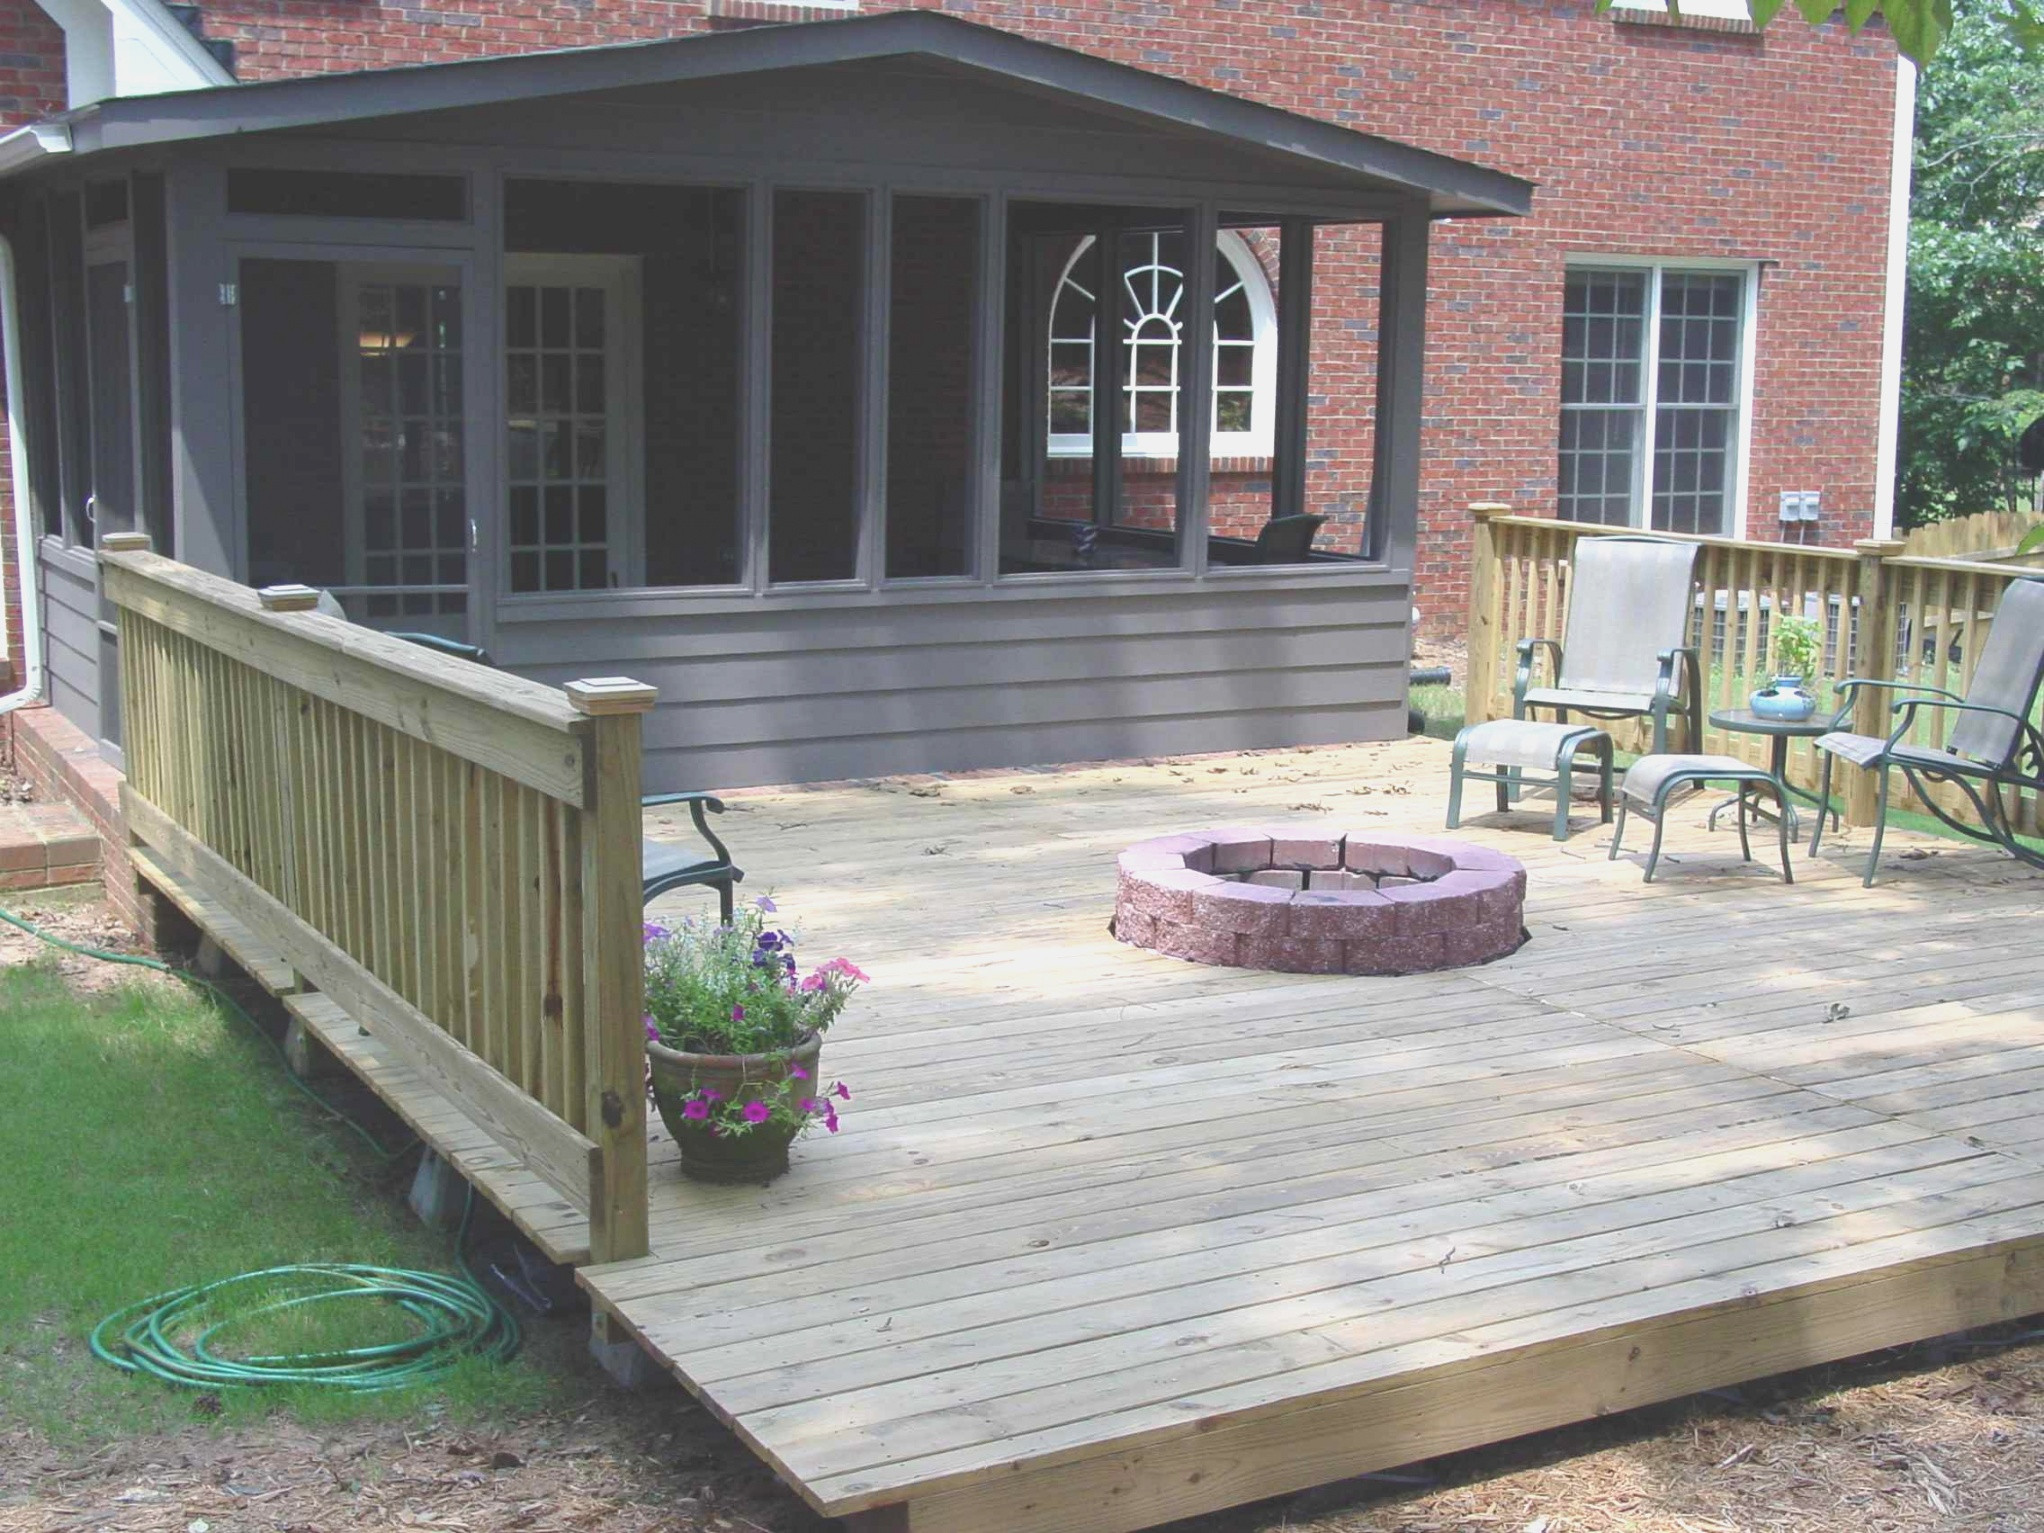 Deck Designs With Fire Pit
 Simple Guidance For You In Deck Fire Pit